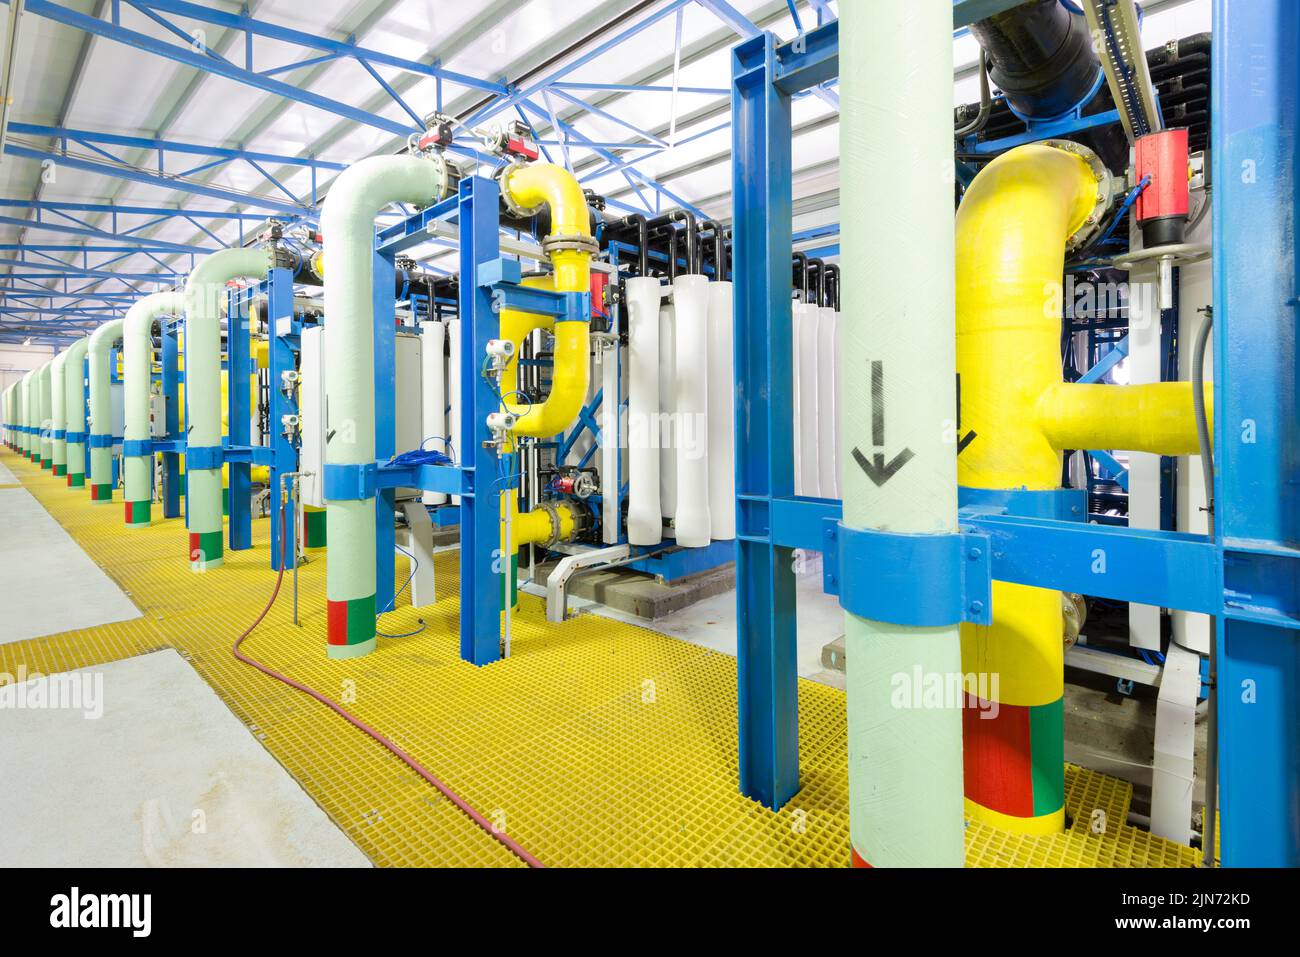 The reverse osmosis equipment in a desalination plant. Stock Photo